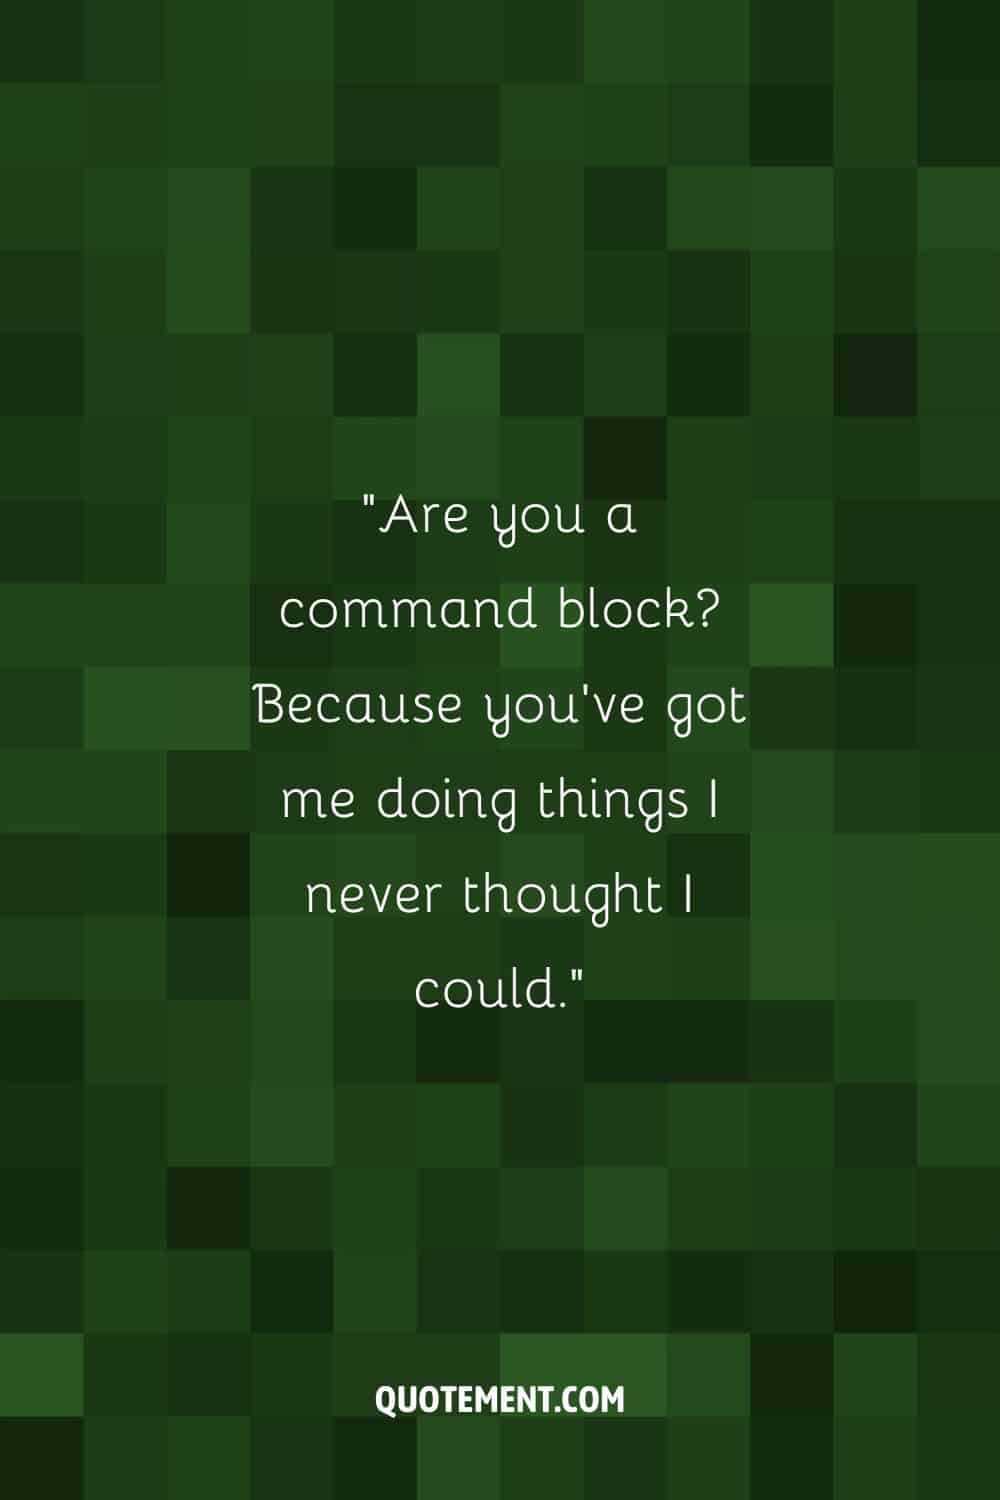 Are you a command block Because you've got me doing things I never thought I could.